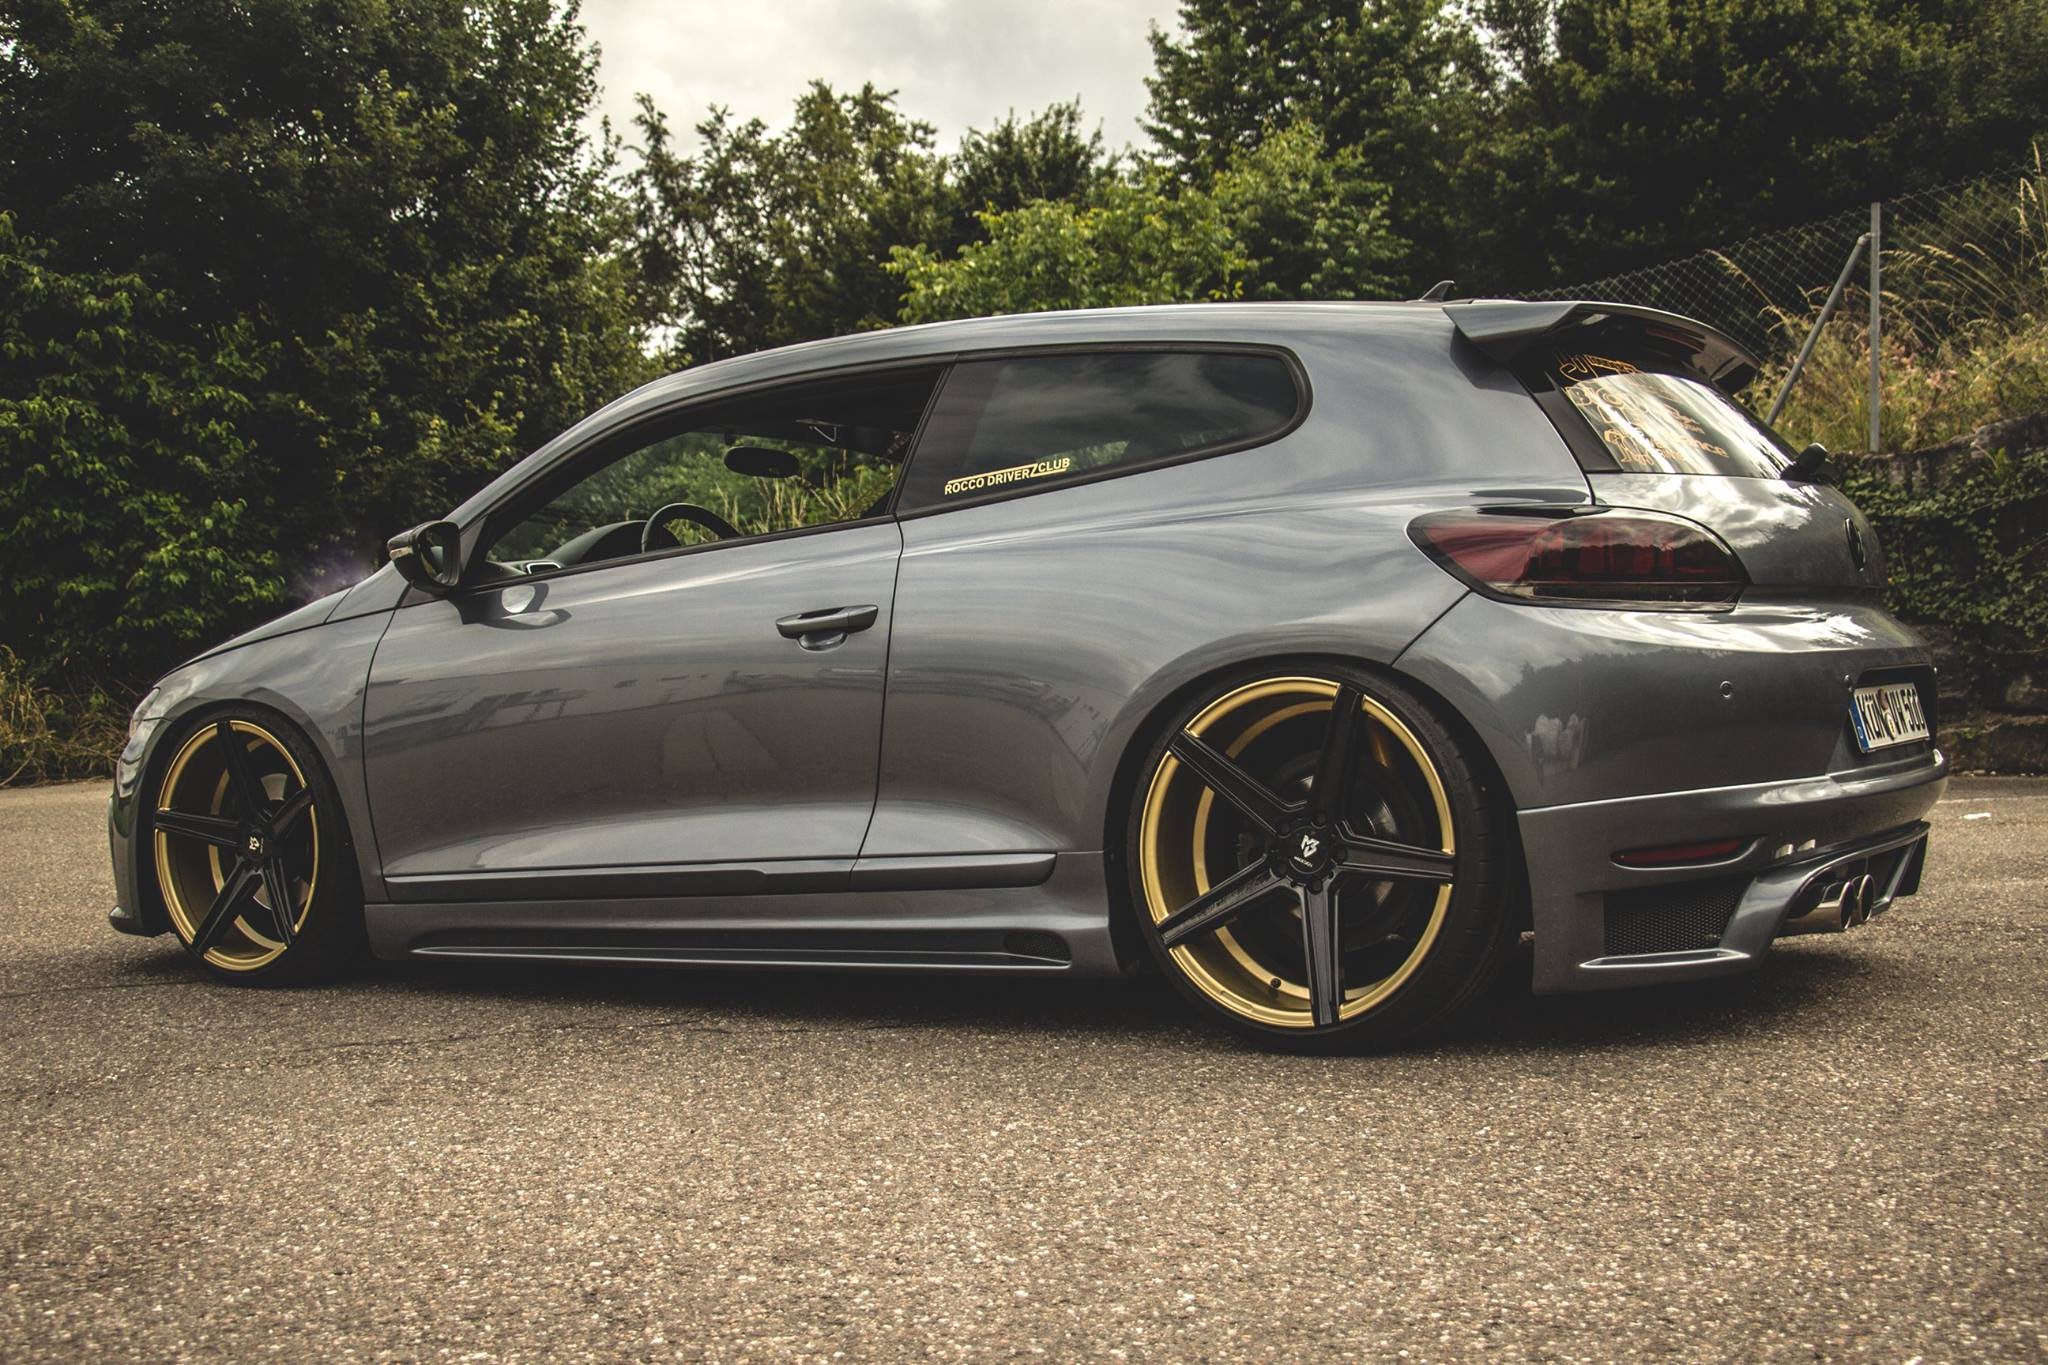 Volkswagen Scirocco Backgrounds, Compatible - PC, Mobile, Gadgets| 2048x1365 px